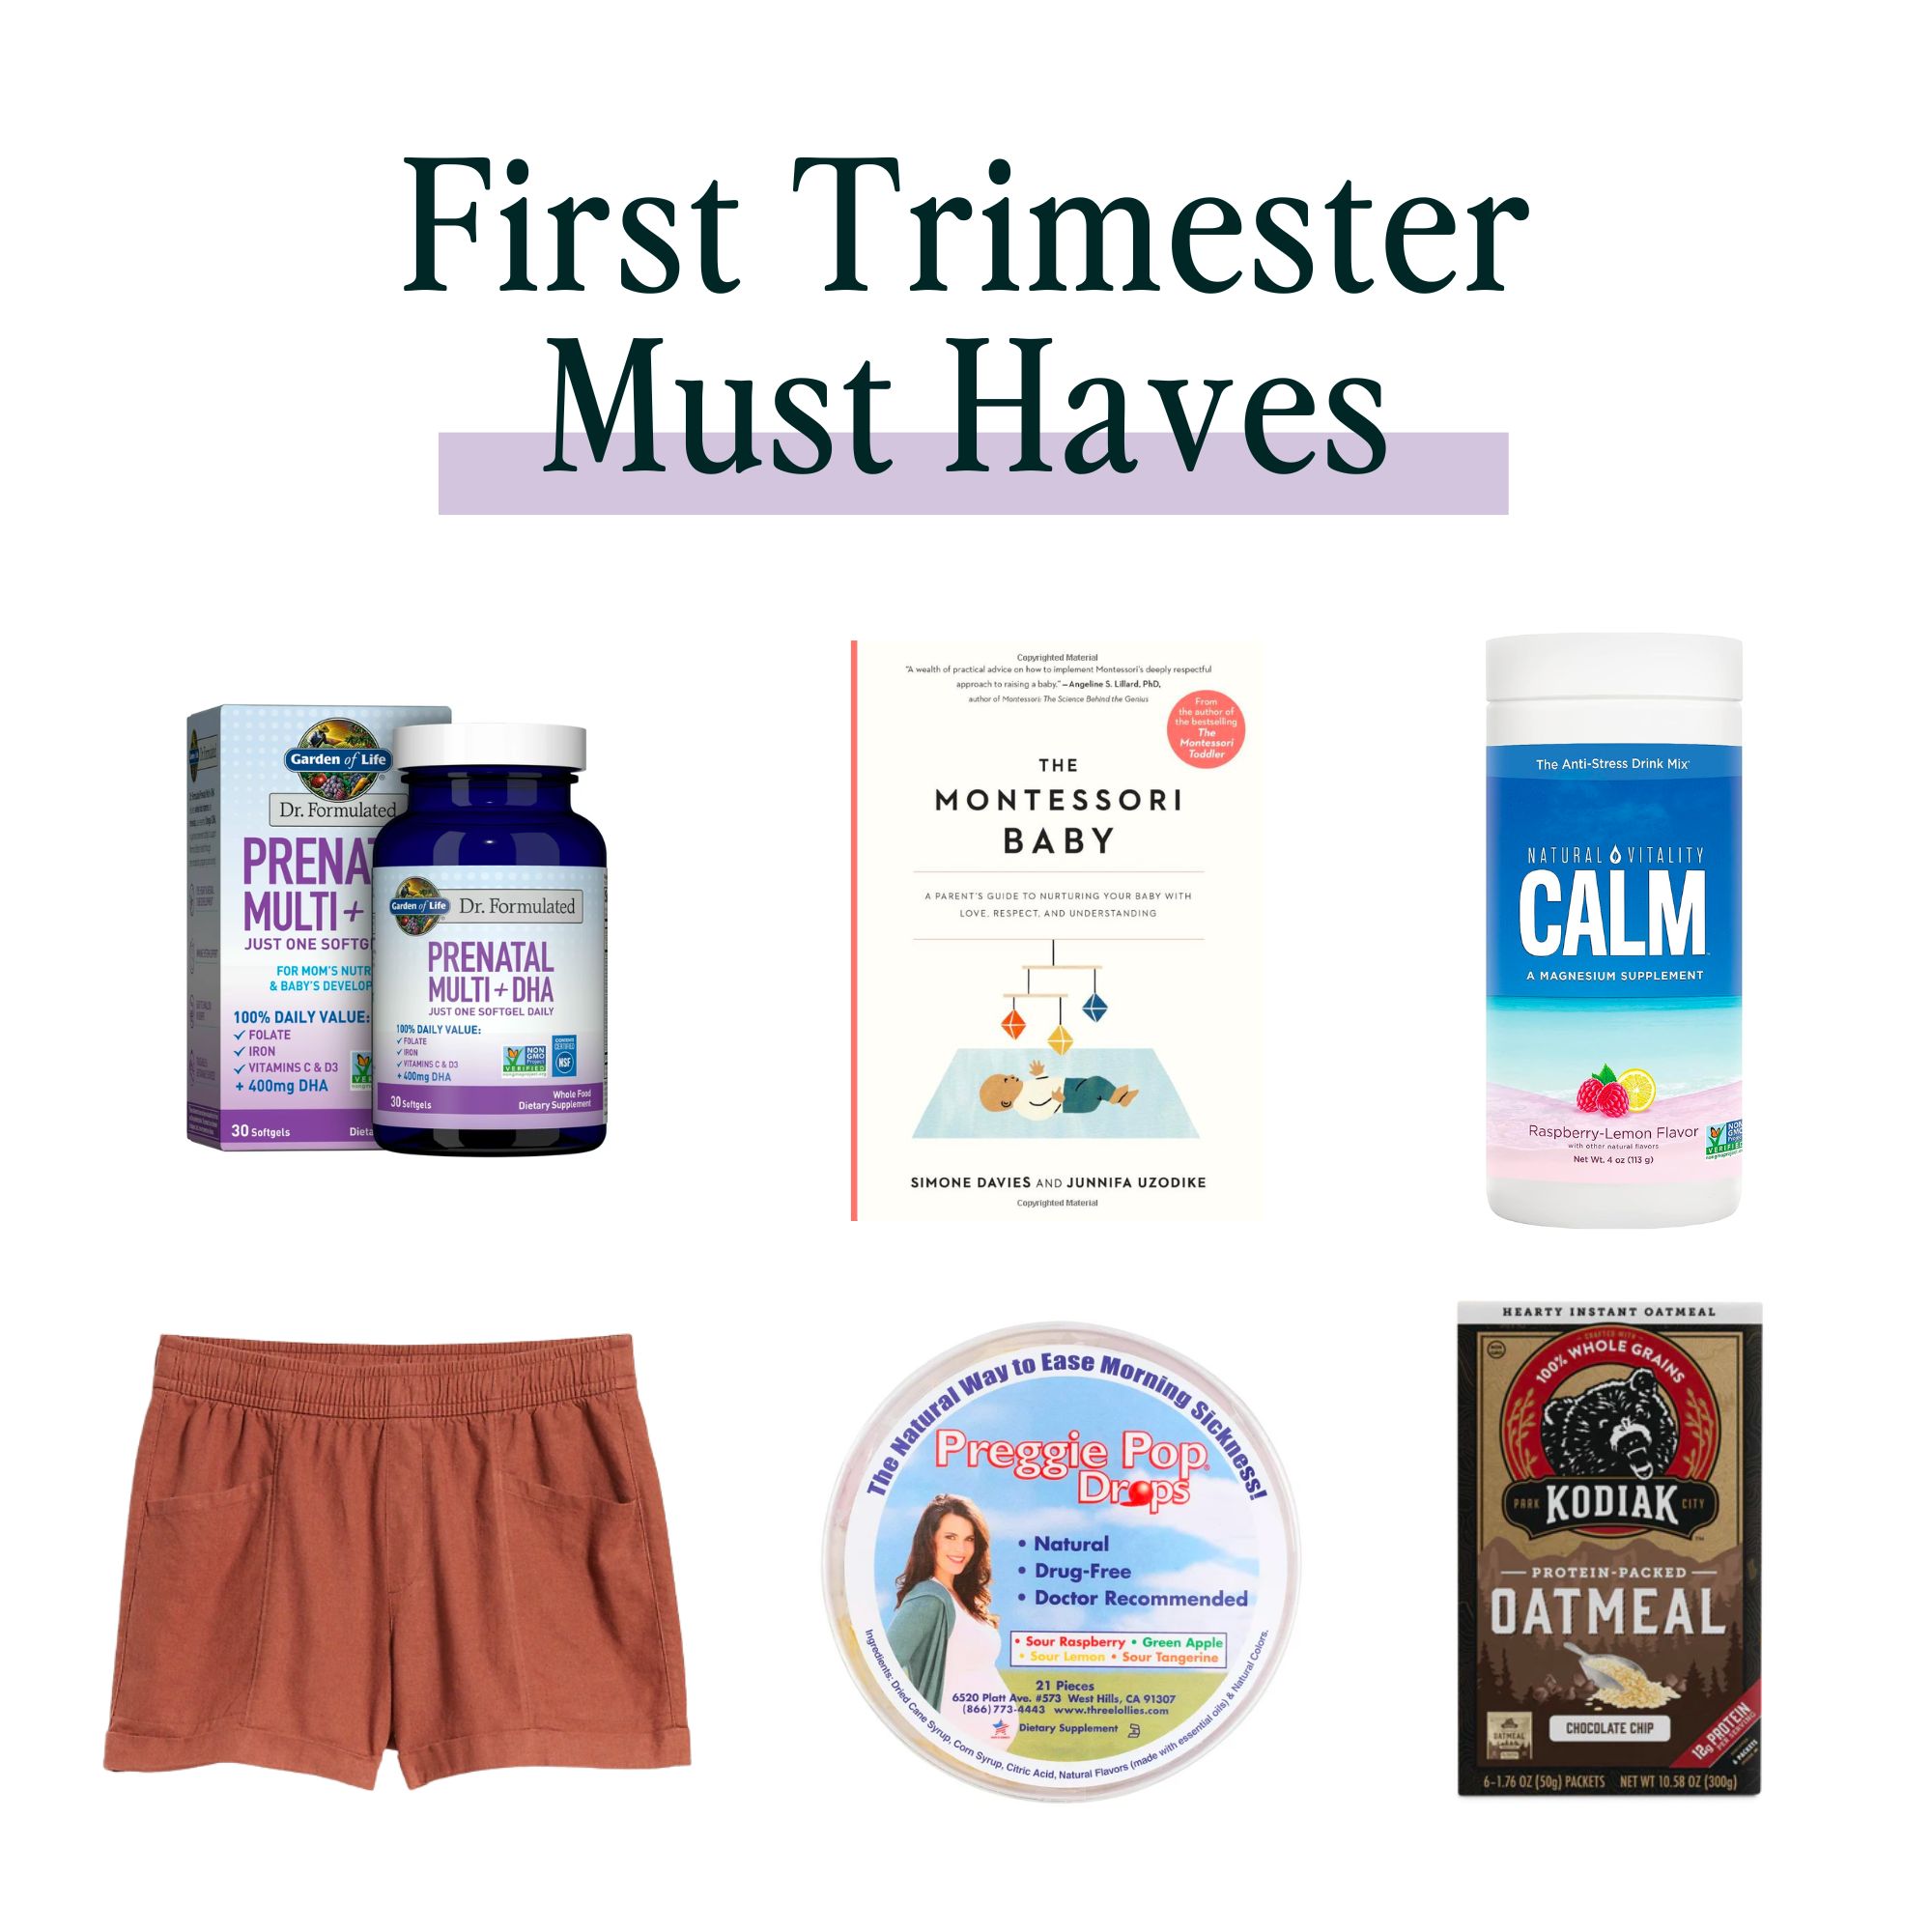 Image says First Trimester Must Haves across the top and then shows prenatal vitamins, the book "The Montessori Baby", Calm Magnesium, a pair of orange shorts, Preggie Pop Drops and a box of Kodiak Oatmeal